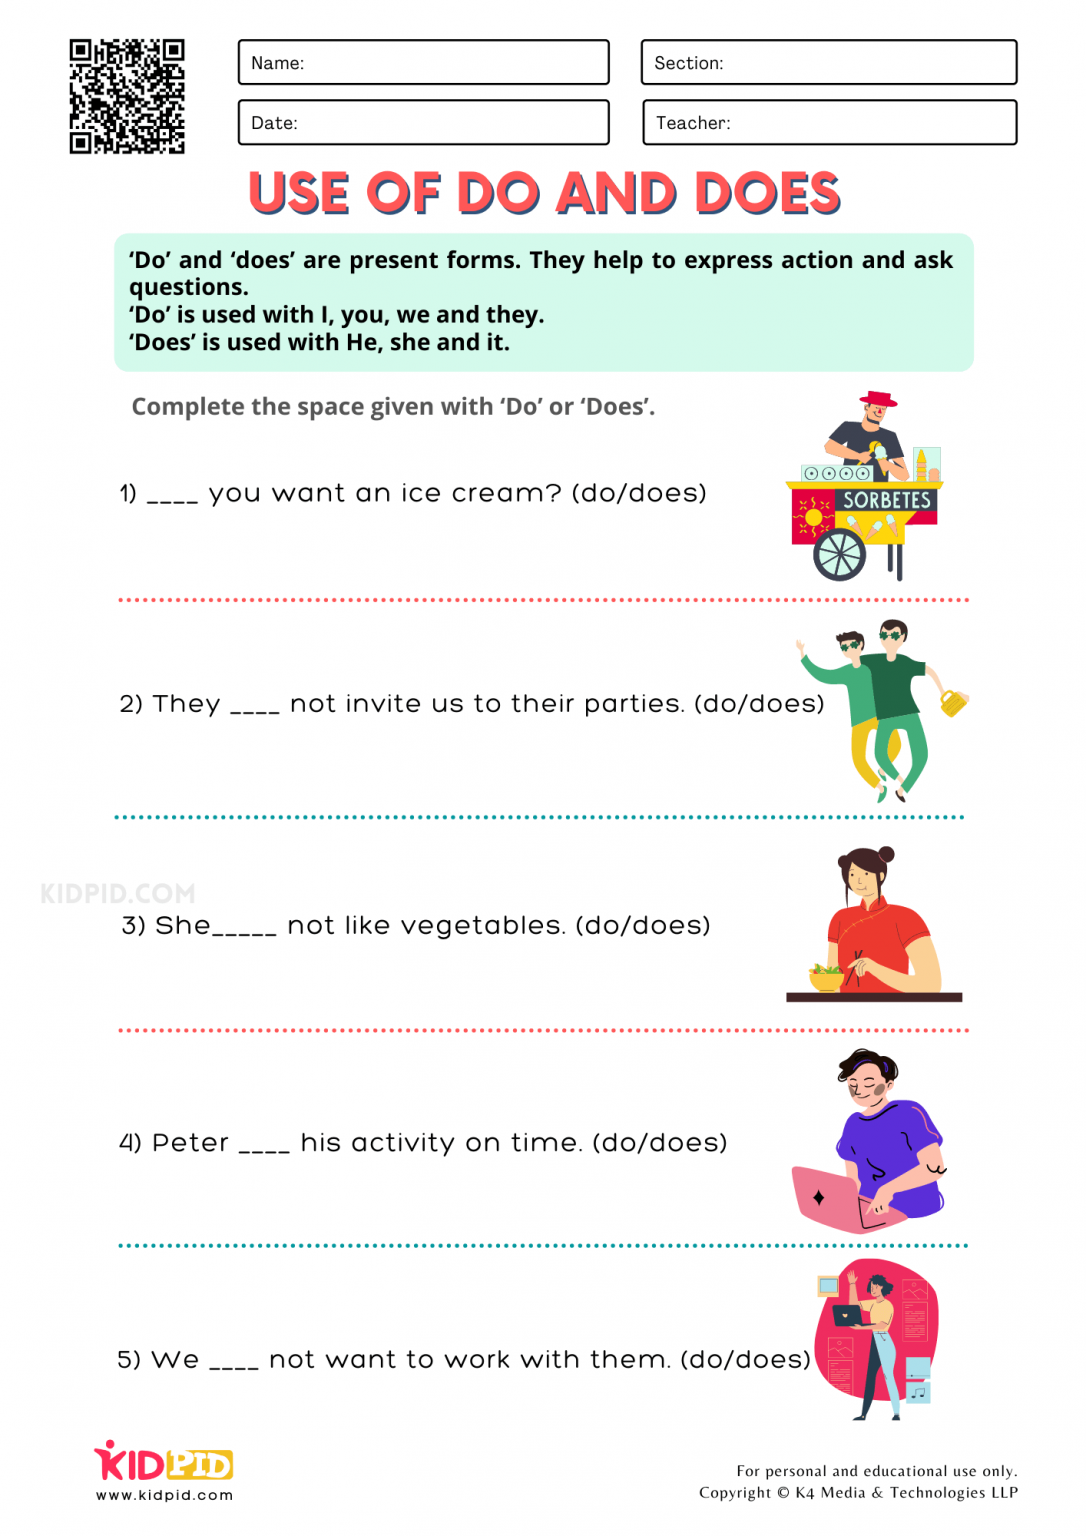 auxiliary-verbs-printable-worksheets-for-grade-1-kidpid